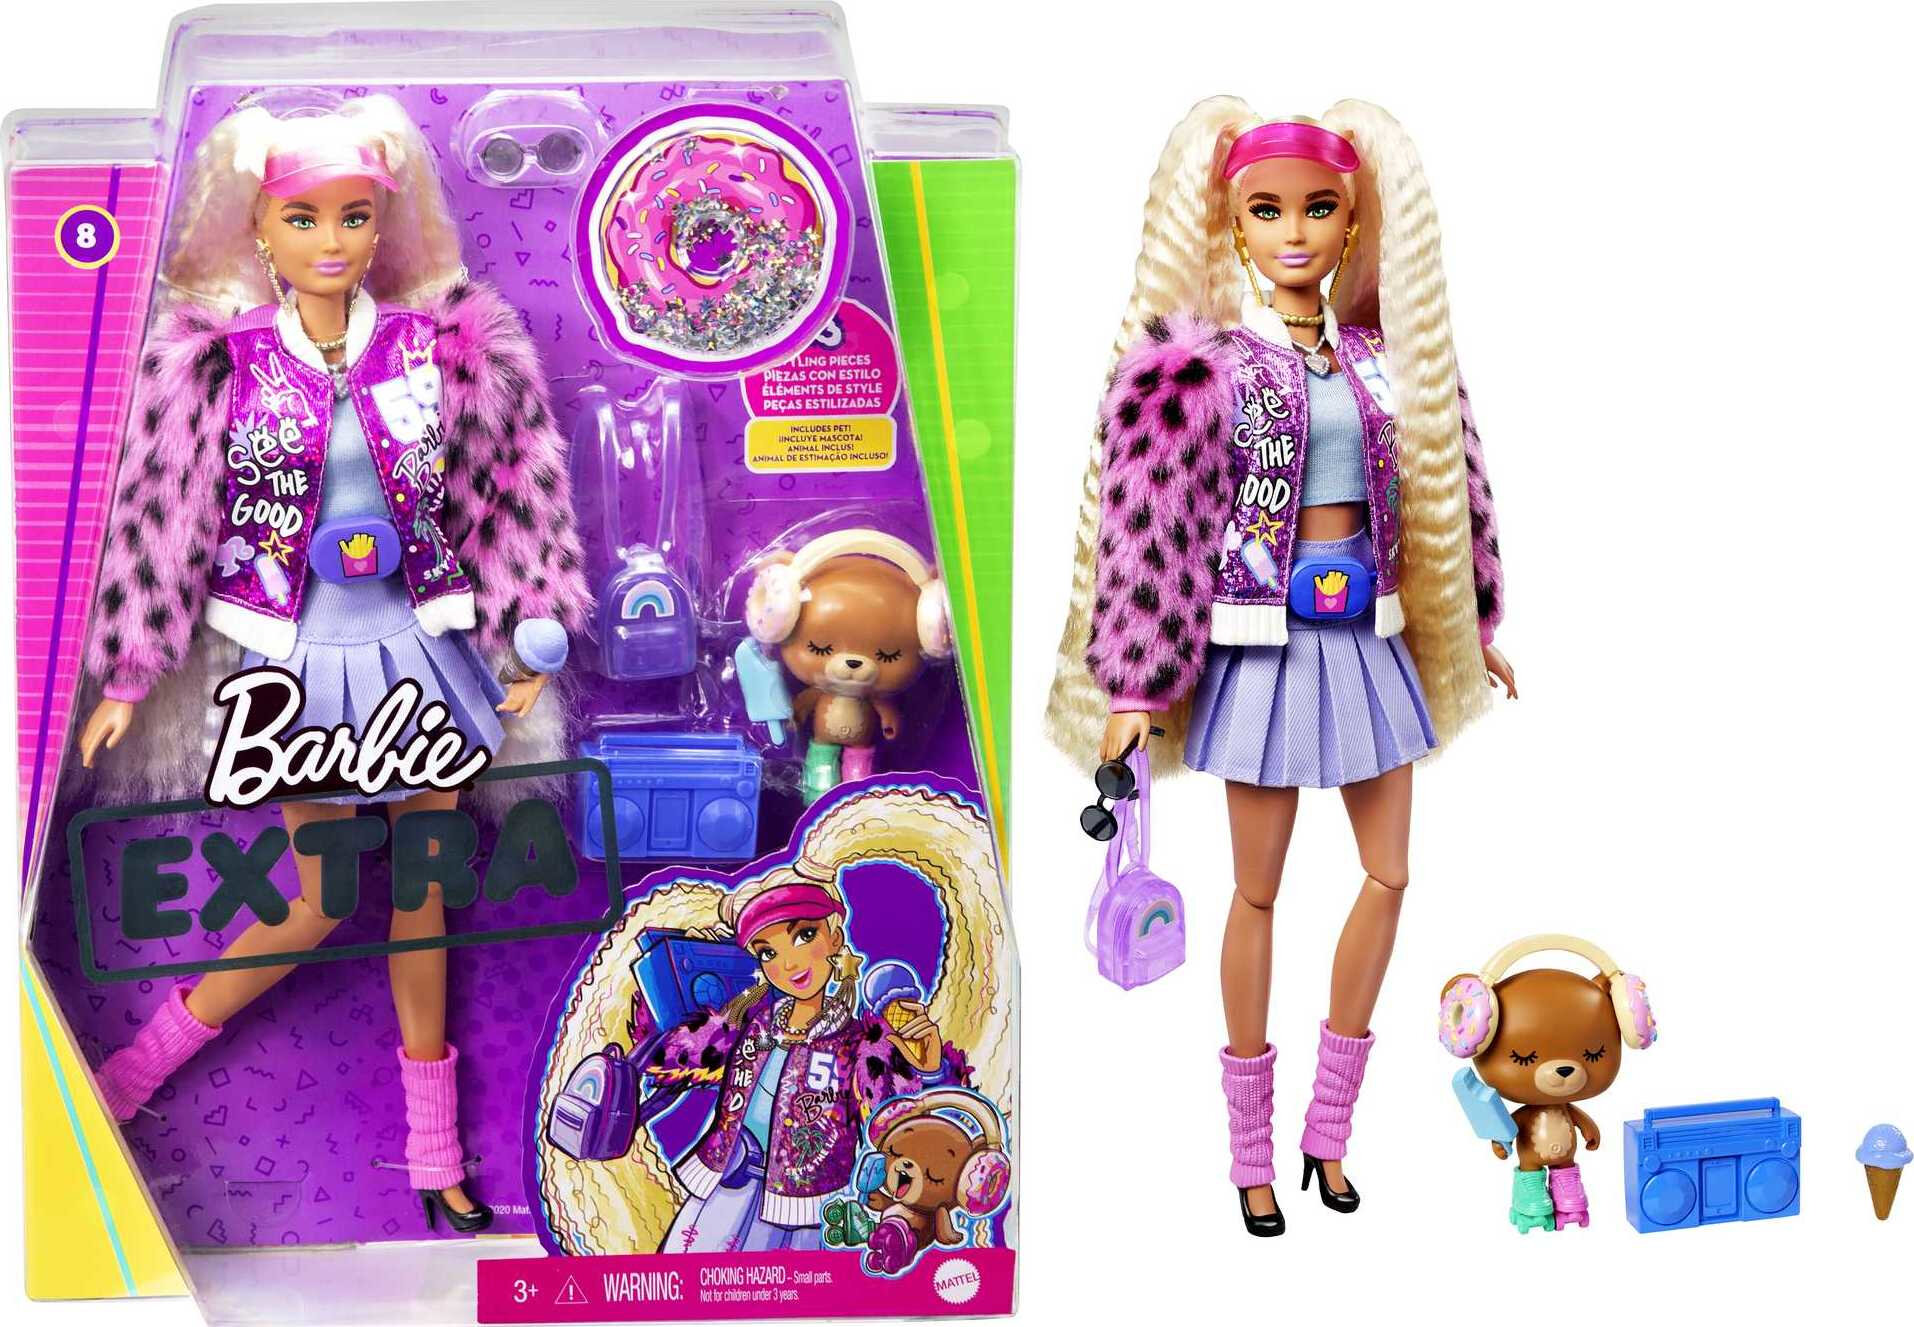 Barbie Extra Doll 8 In Varsity Jacket With Furry Arms and Pet Teddy Bear - image 1 of 7